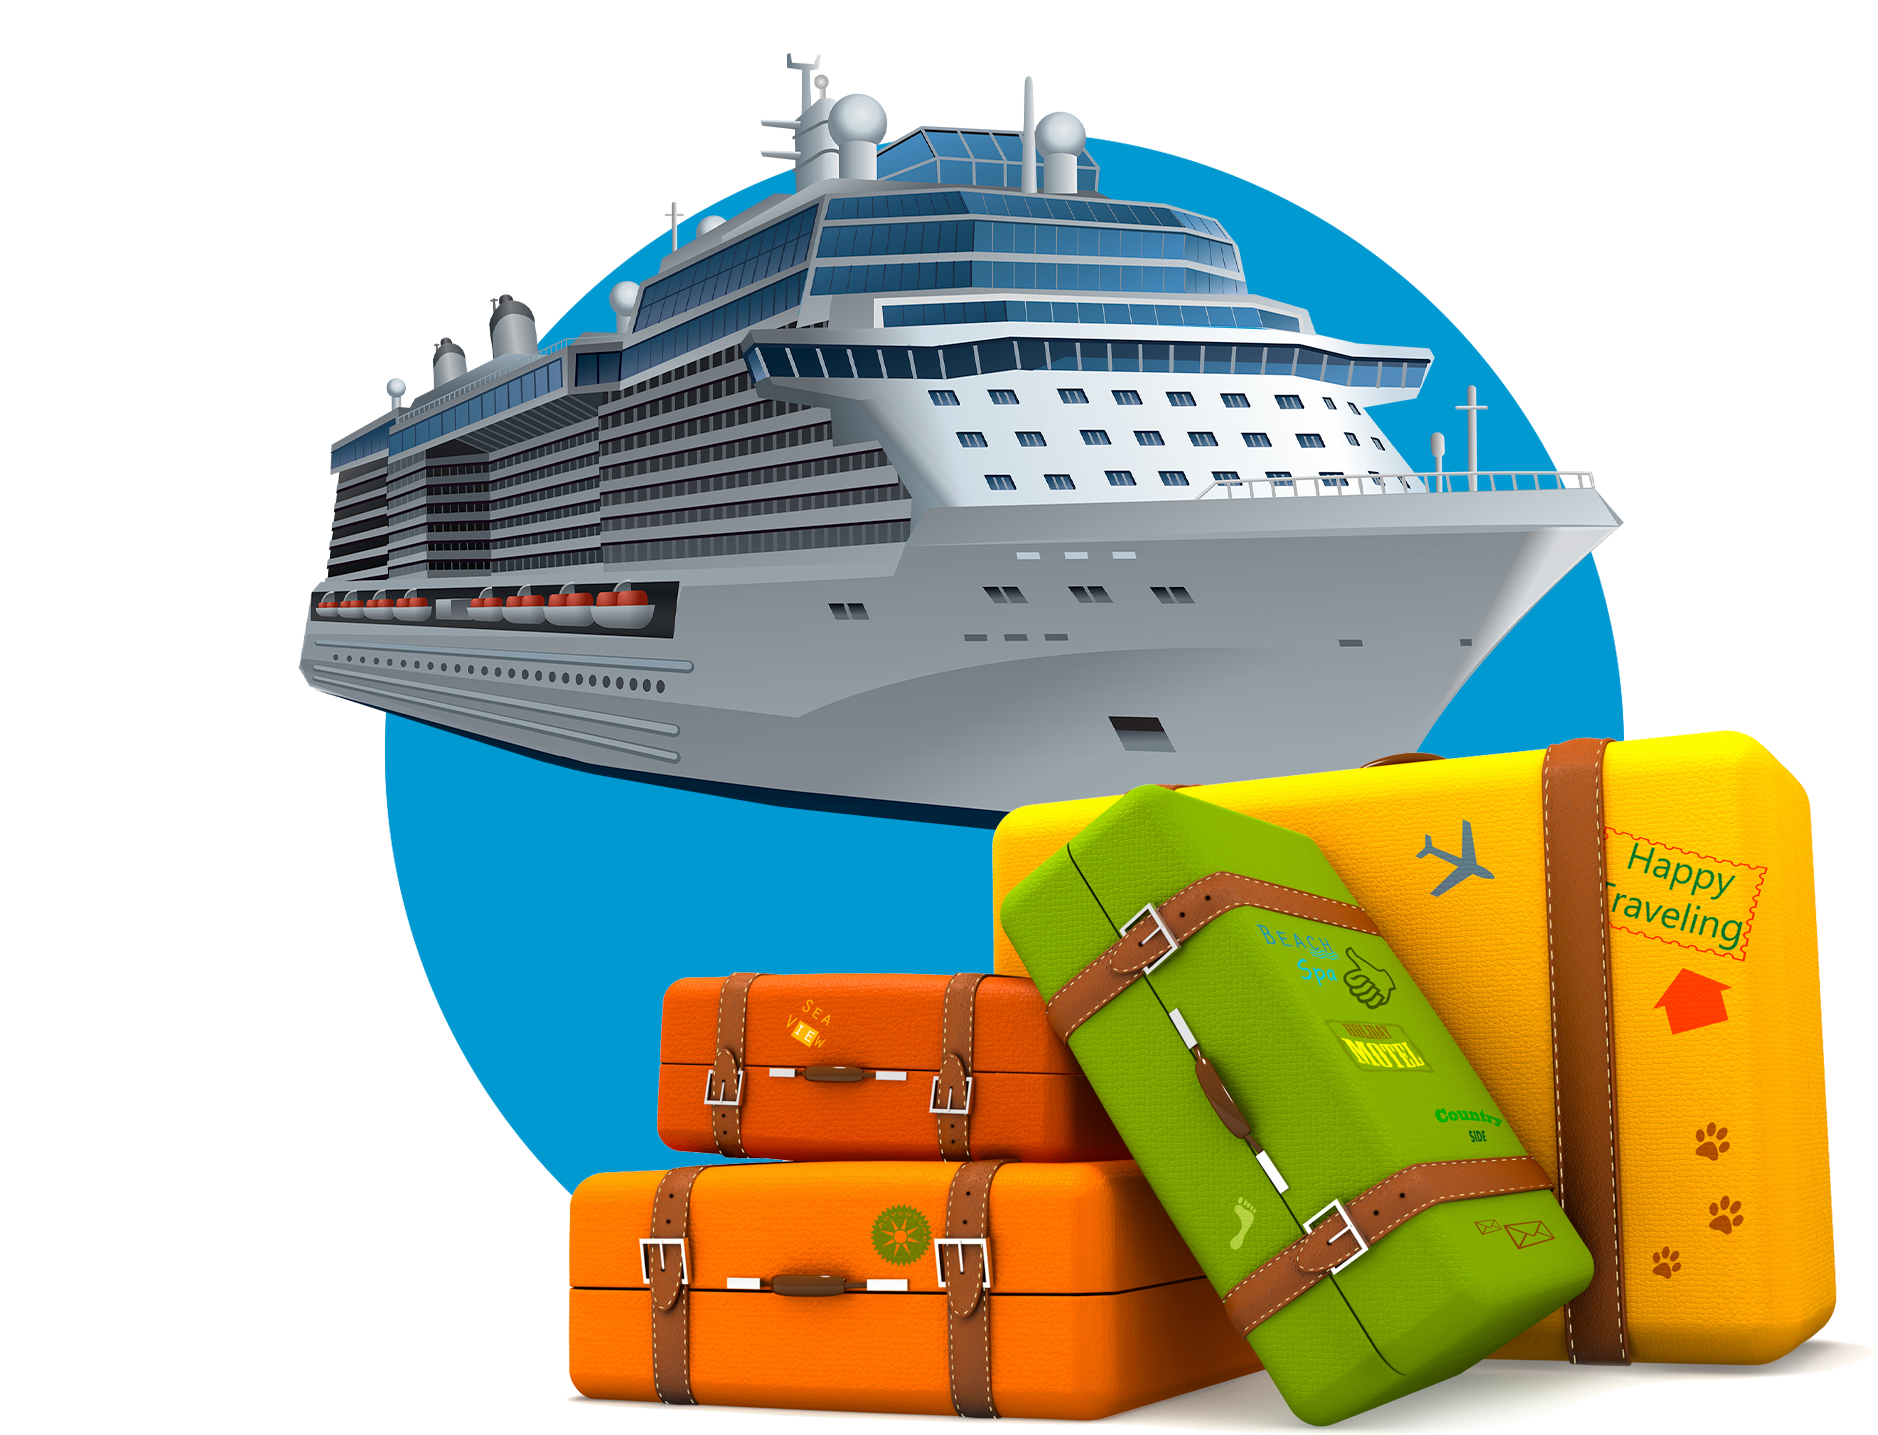 Cruise ship with luggages